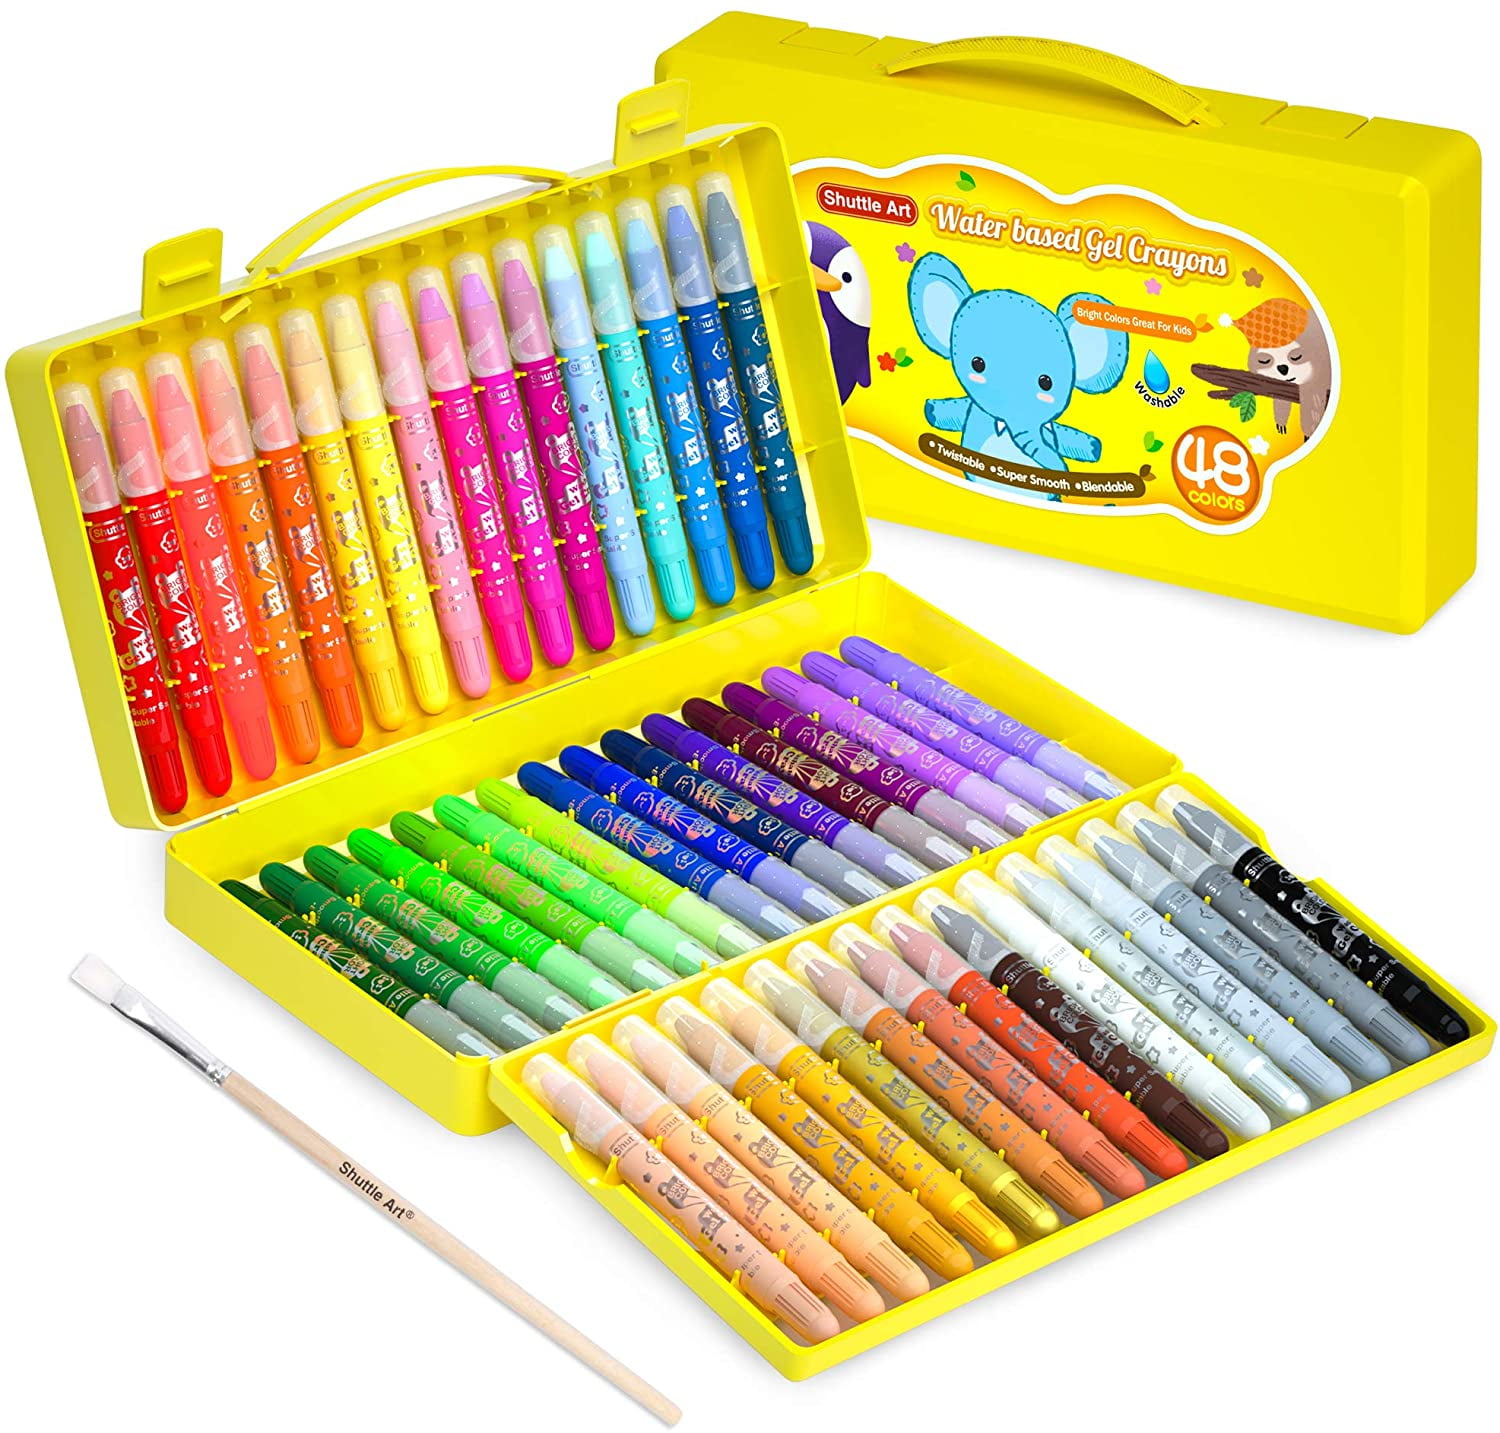 150-Piece Art Set, Art Set for Kids,Deluxe Professional Color Set, Gifts  Art Set Case,Art Kits for Kids and Adult,Includes Oil Pastels, Crayons,  Colored Pencils,Christmas Gifts(Black) 